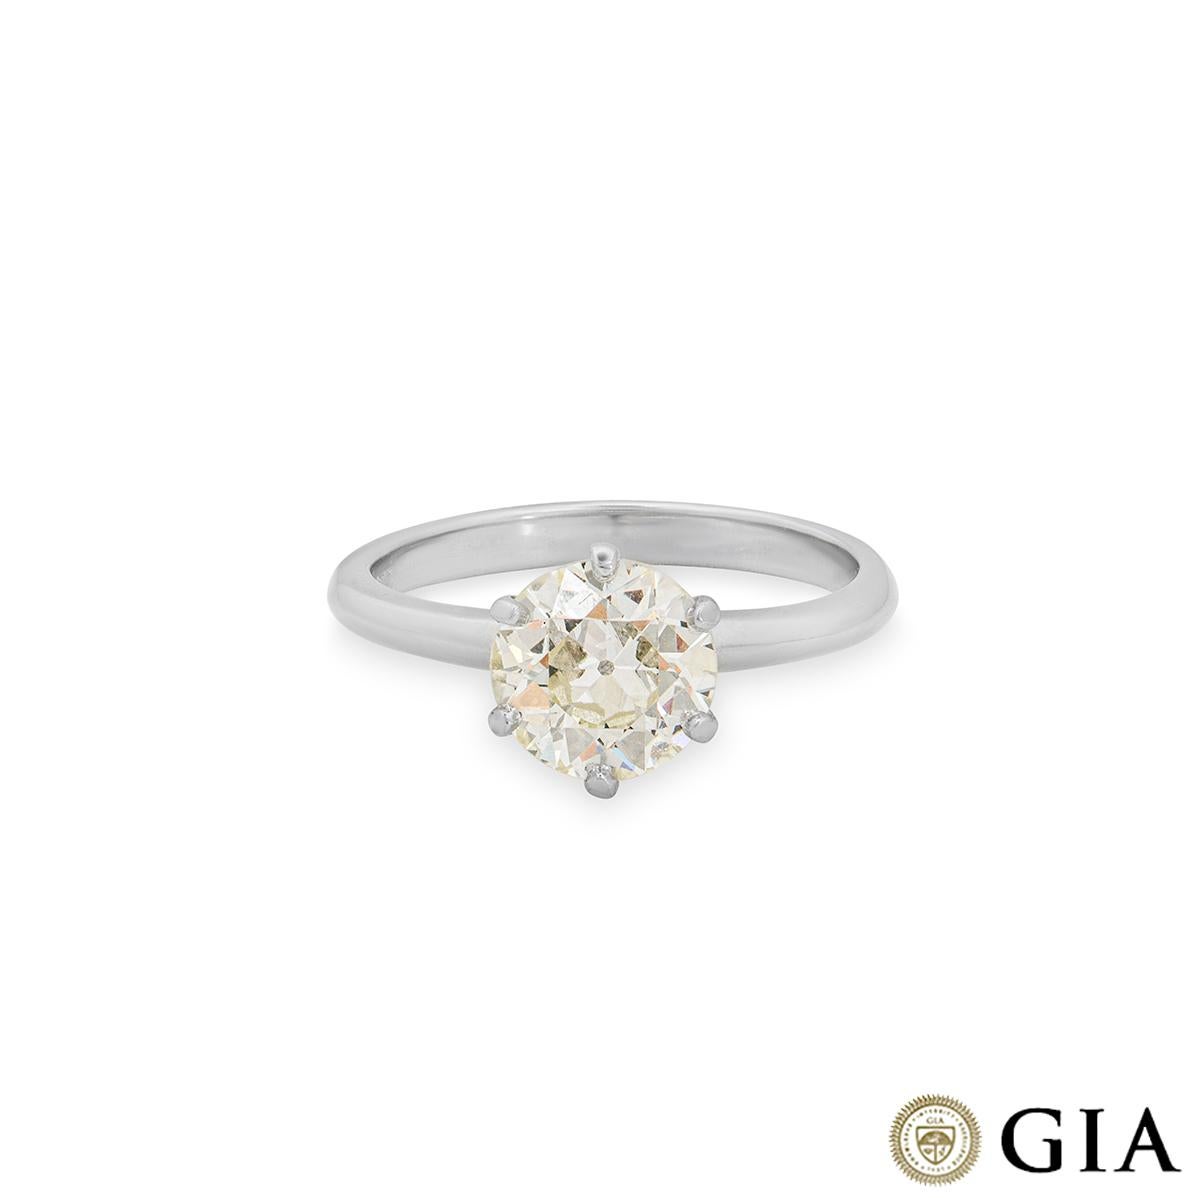 GIA Certified White Gold Old European Cut Diamond Ring 1.61ct M/VS2 In New Condition For Sale In London, GB